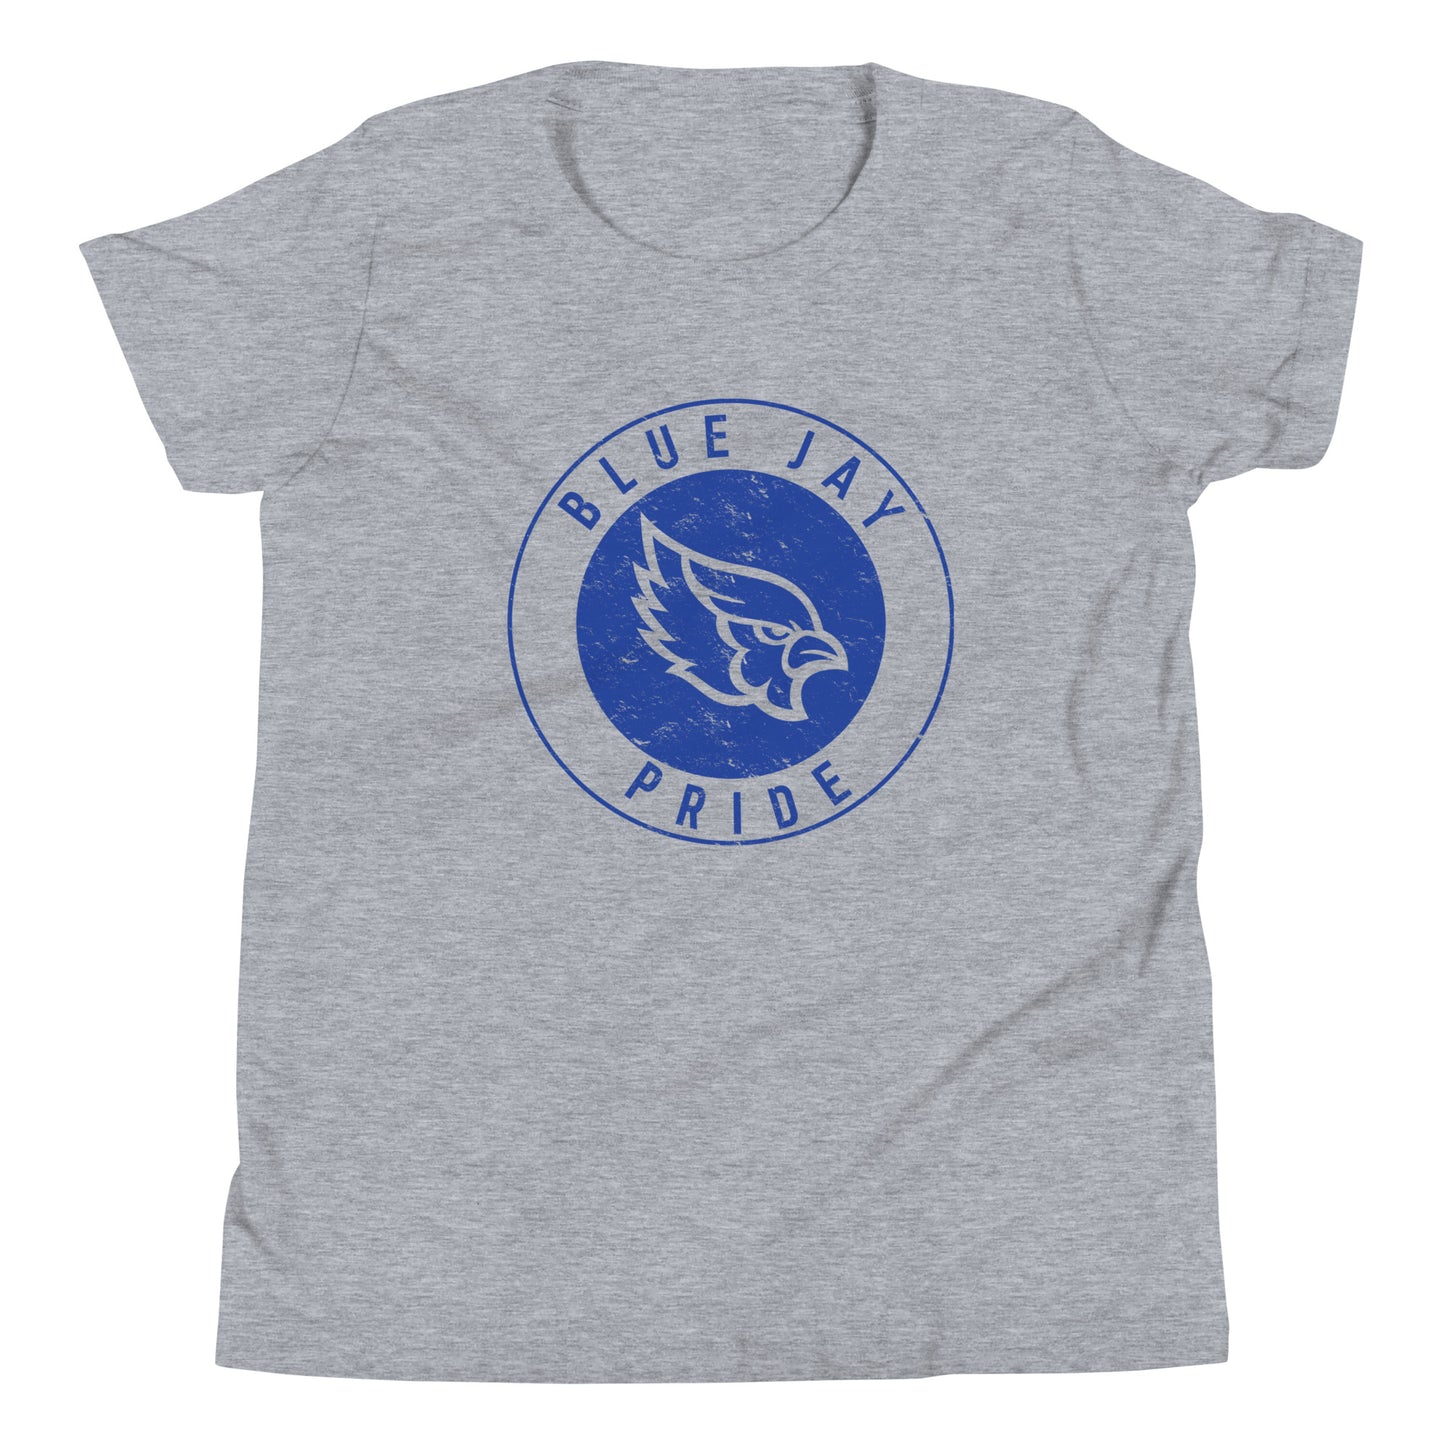 Blue Jay Pride YOUTH Bella Canvas Jersey Tee in Athletic Heather